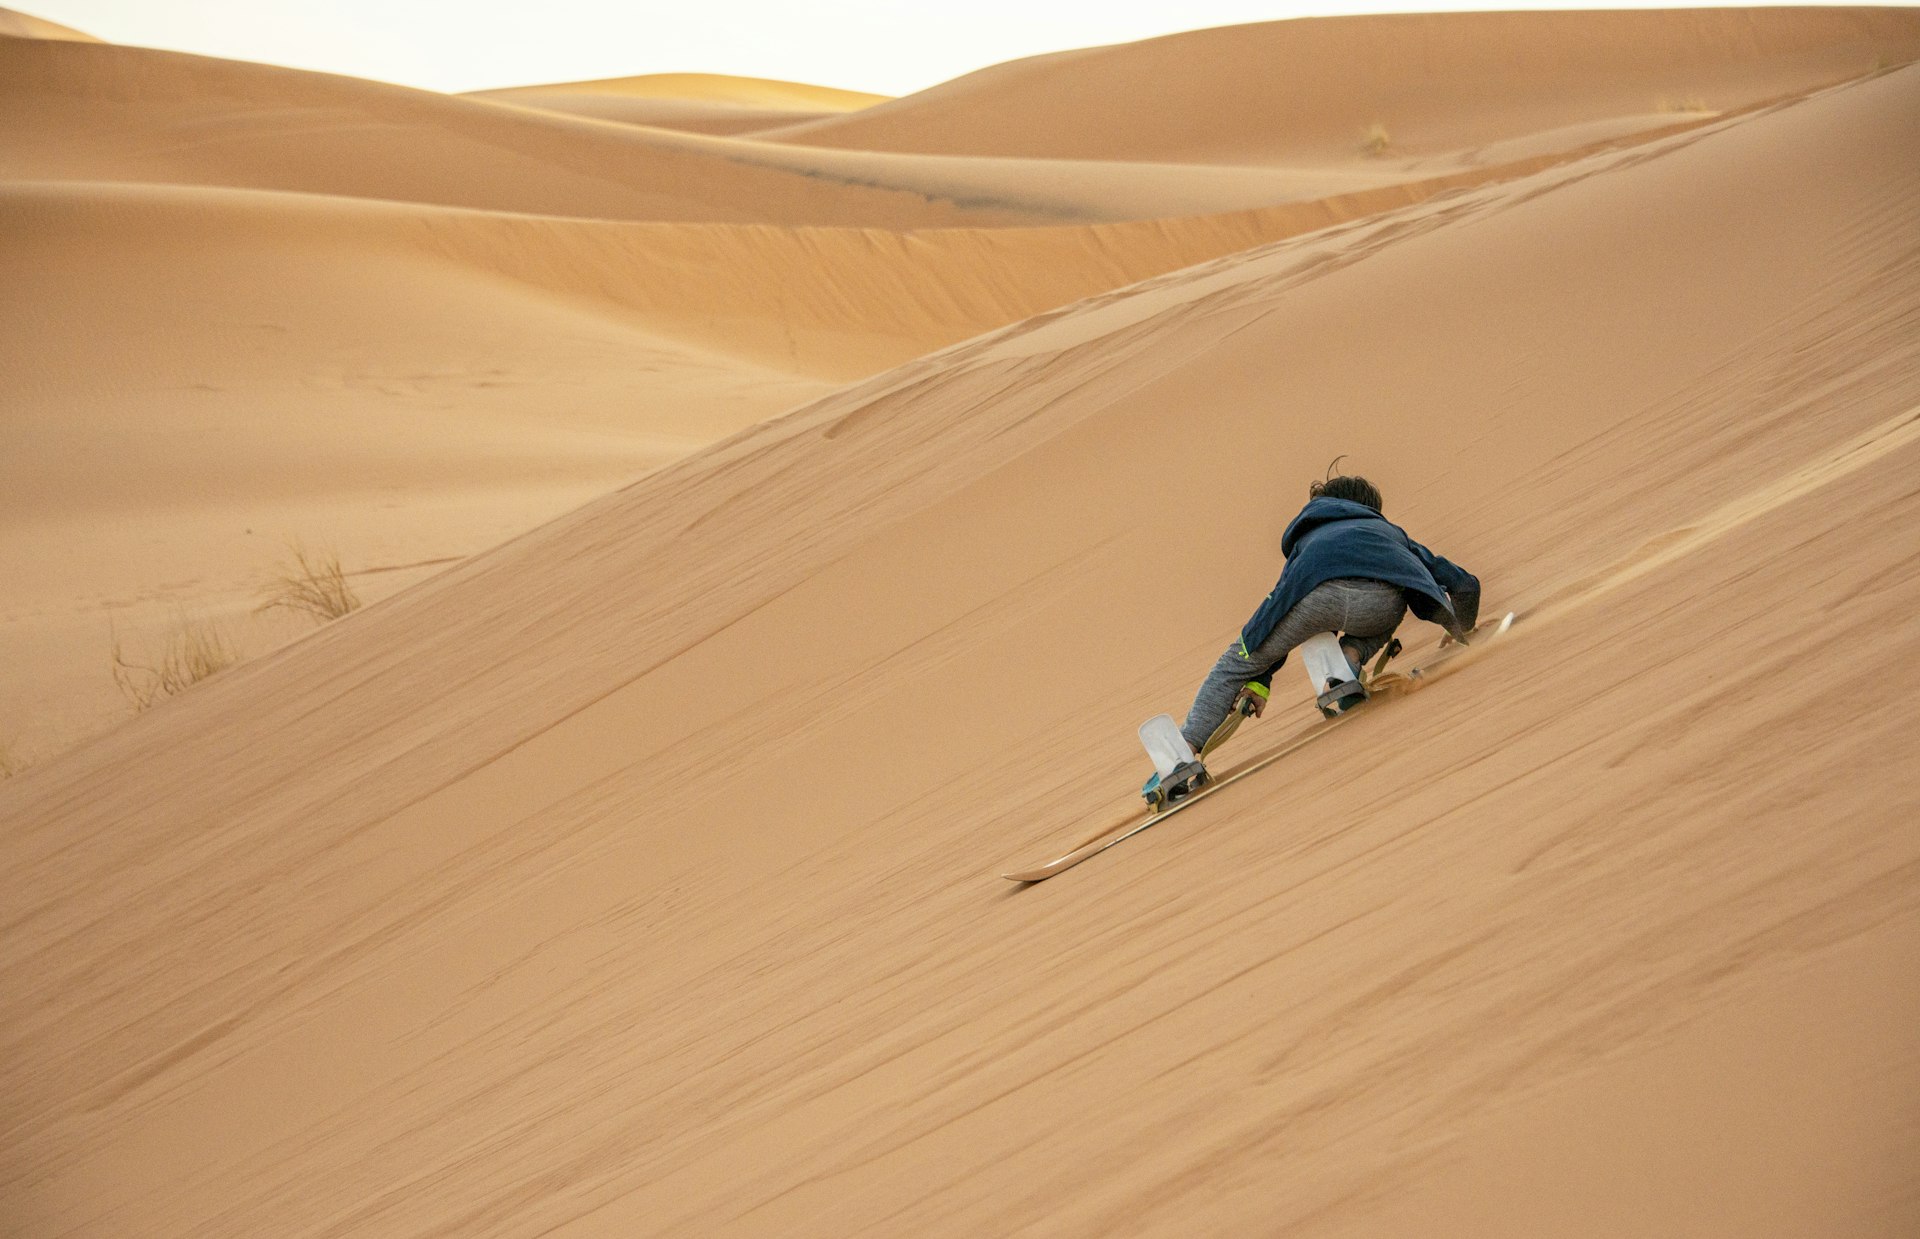 A young boy sandboards down a large dune in the Saraha, Morocco